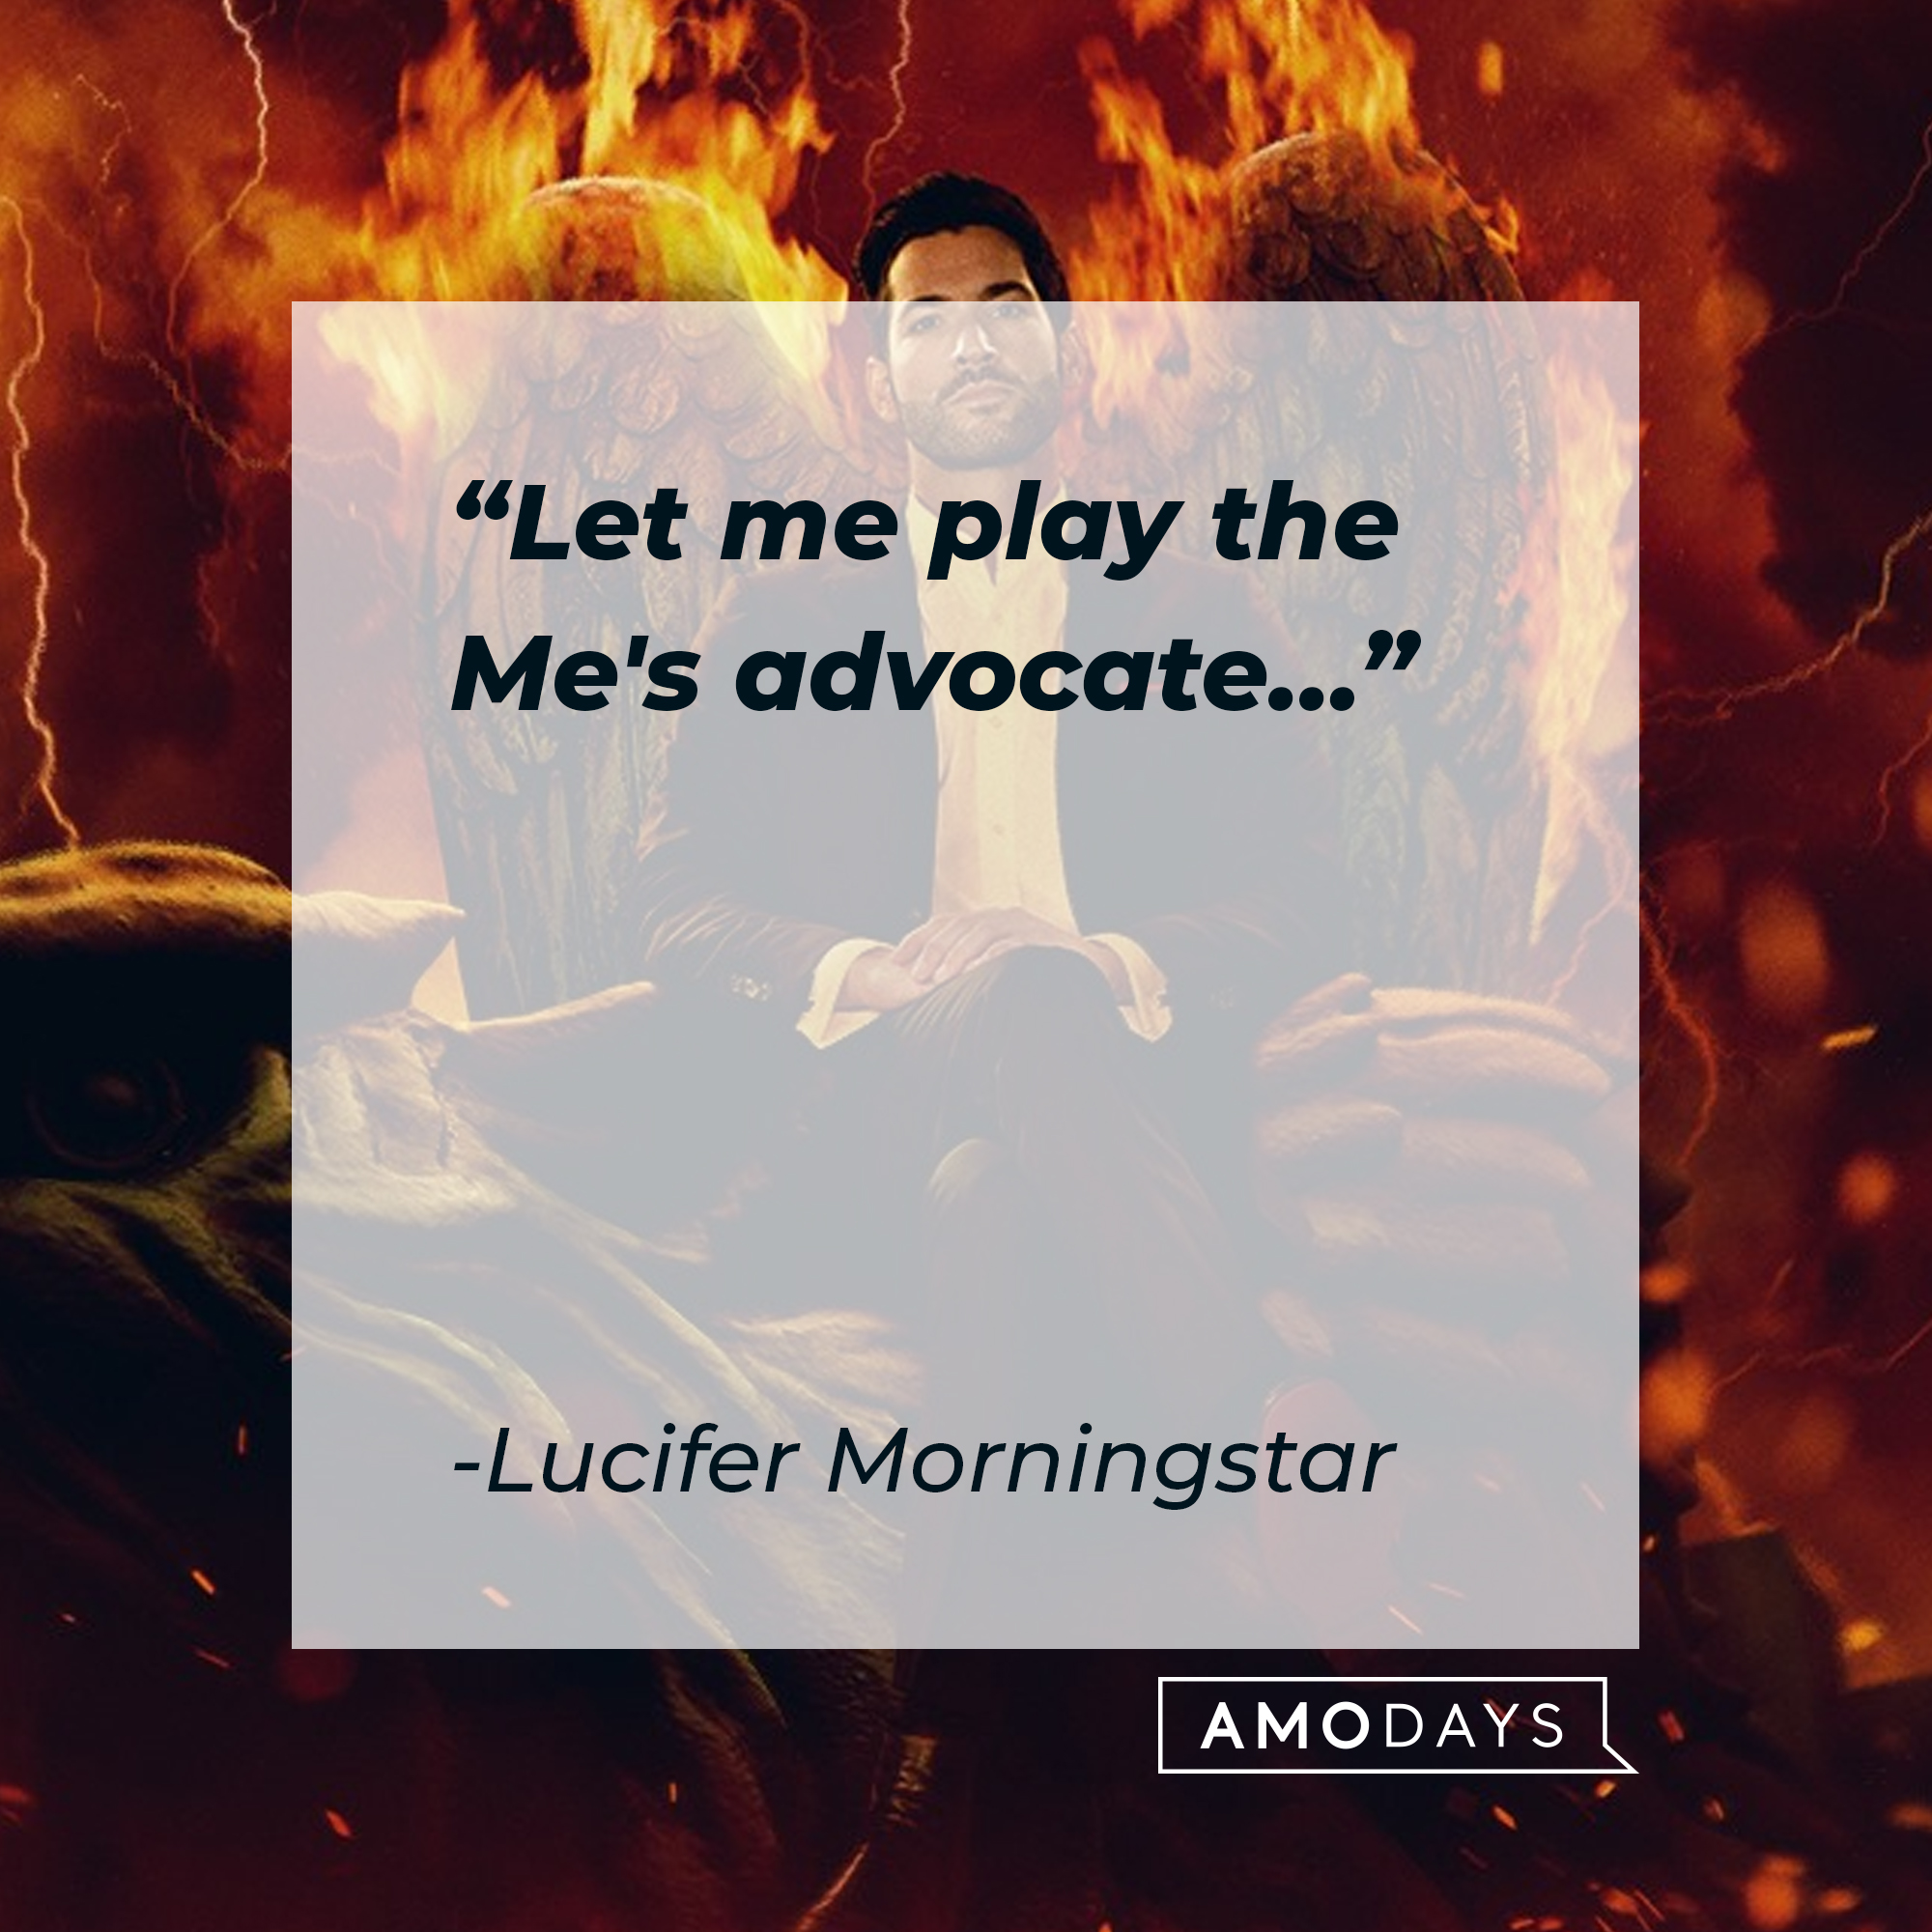 Lucifer Morningstar’s quote: "Let me play the Me's advocate…" | Source: Facebook.com/LuciferNetflix